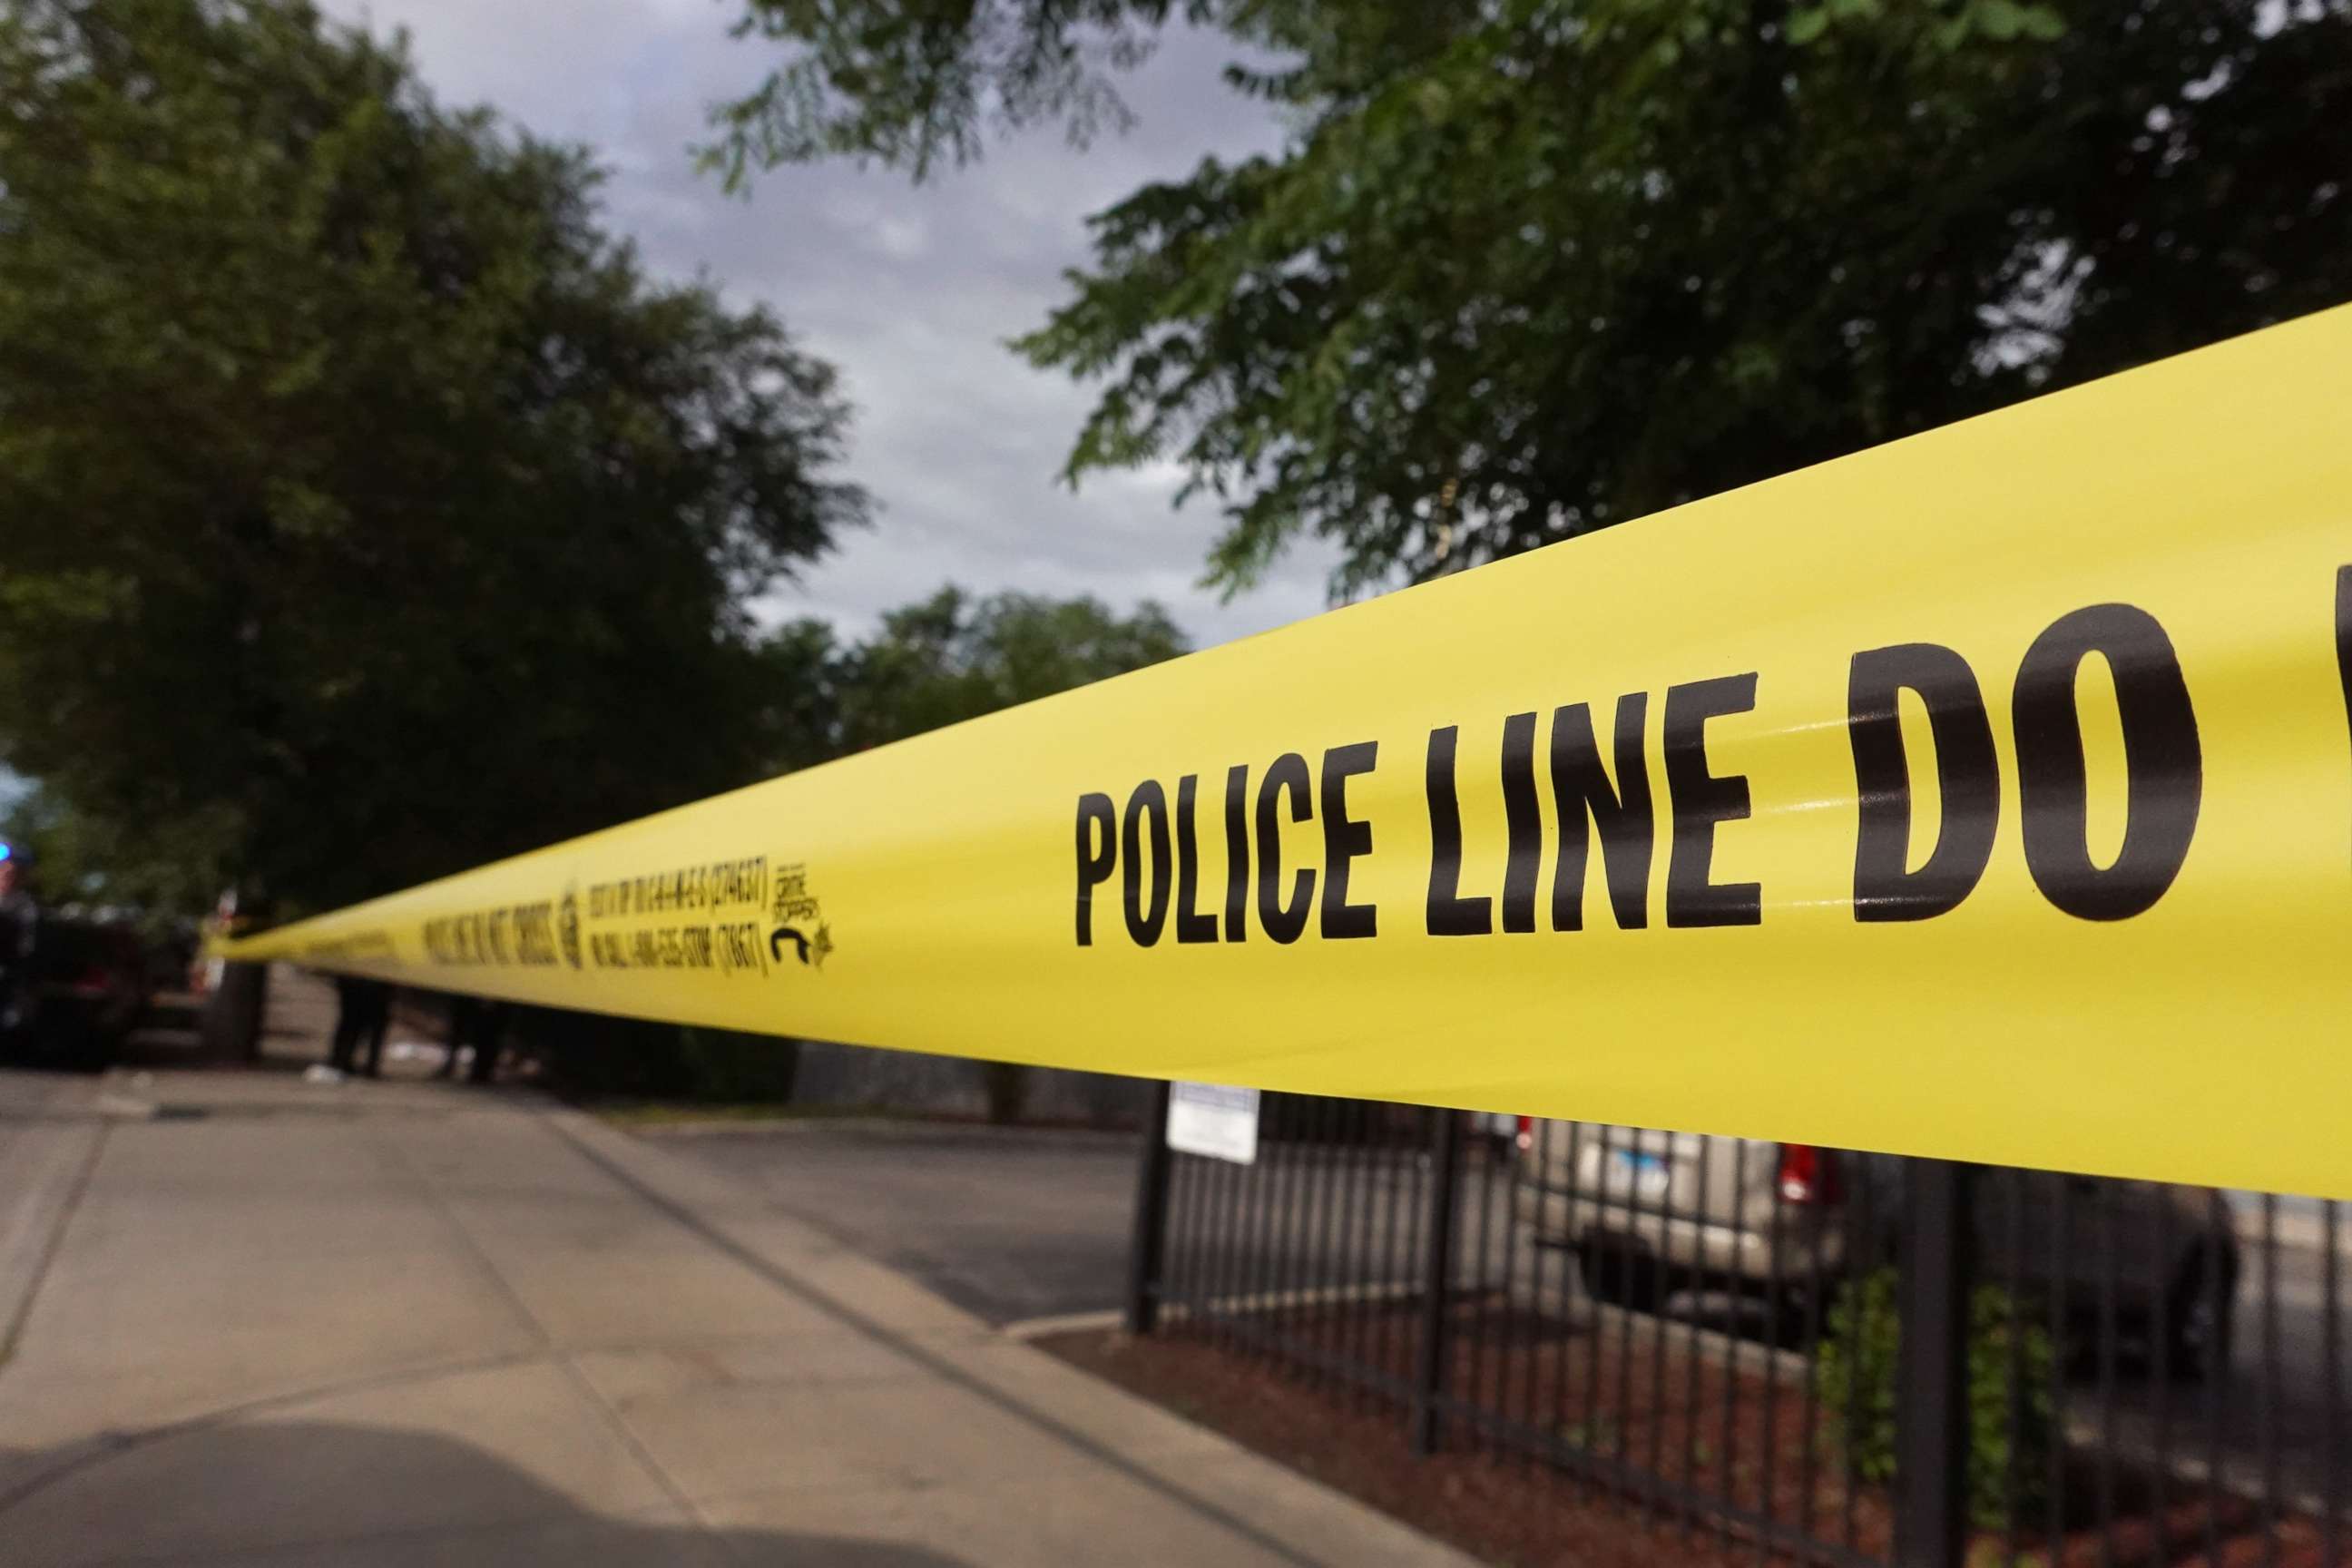 PHOTO: CHICAGO, ILLINOIS - JUNE 23: Police tape surrounds a crime scene where three people were shot at the Wentworth Gardens housing complex in the Bridgeport neighborhood on June 23, 2021 in Chicago, Illinois. 